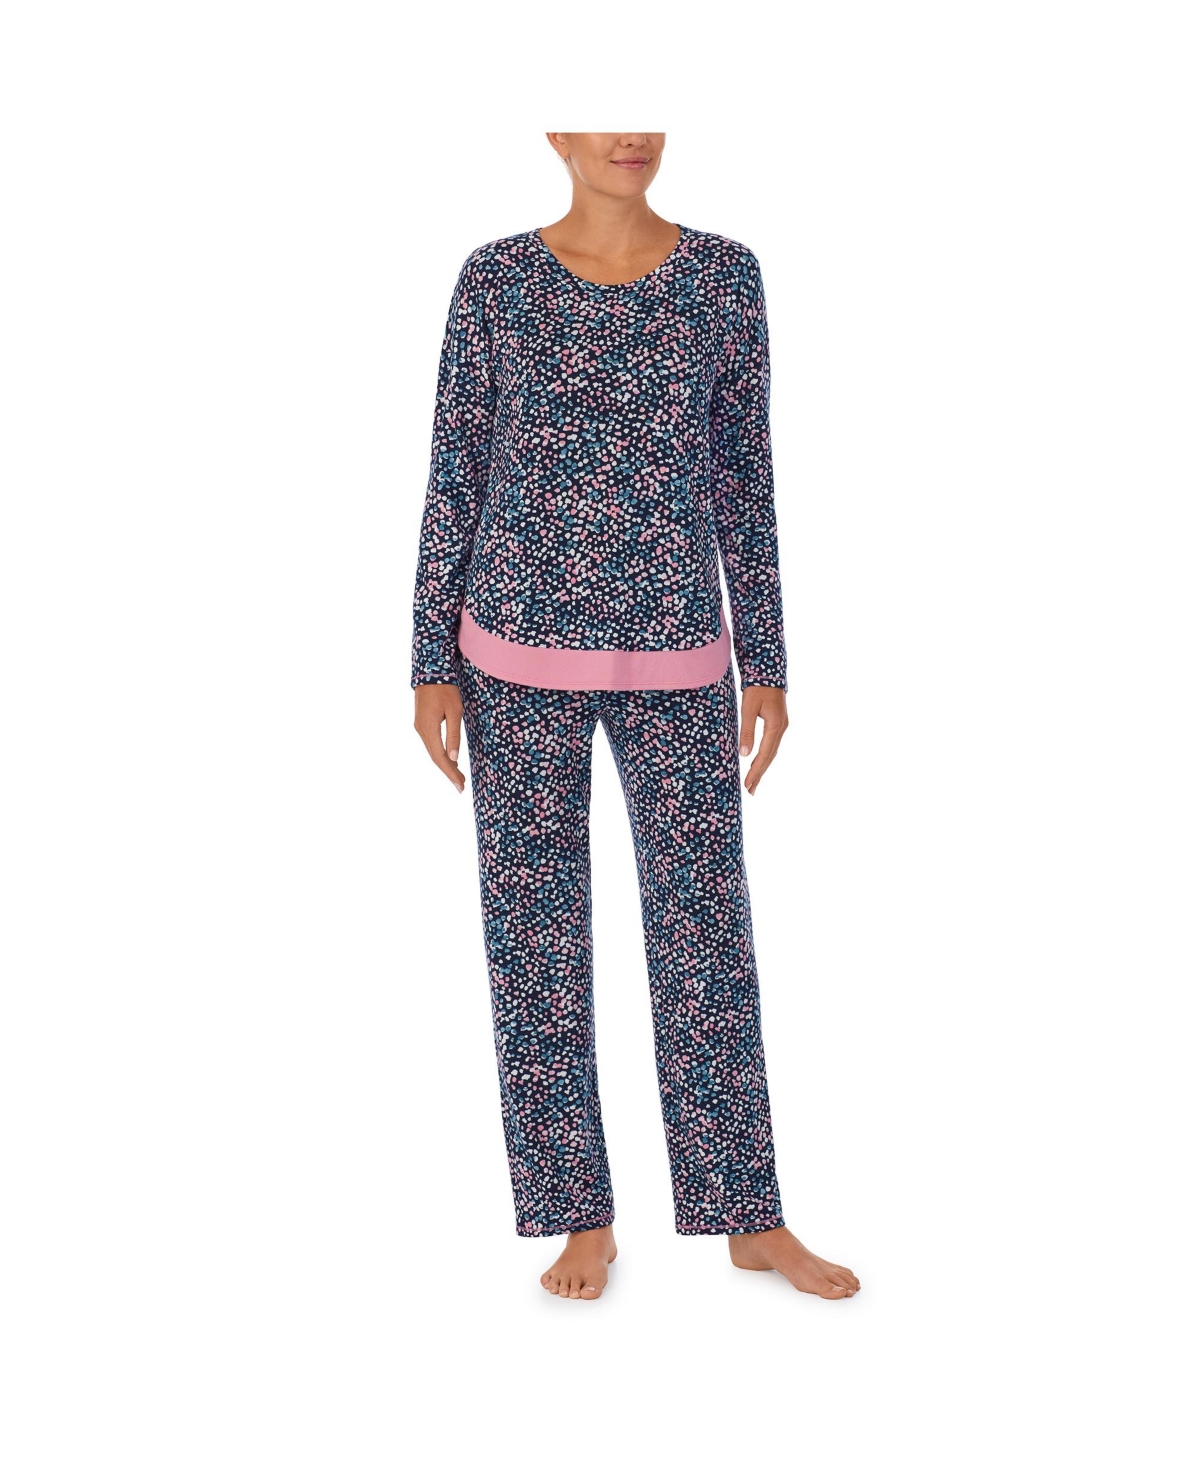 Ellen Tracy Women's 2-pc. Printed Long-sleeve Pajamas Set In Holiday Ornaments